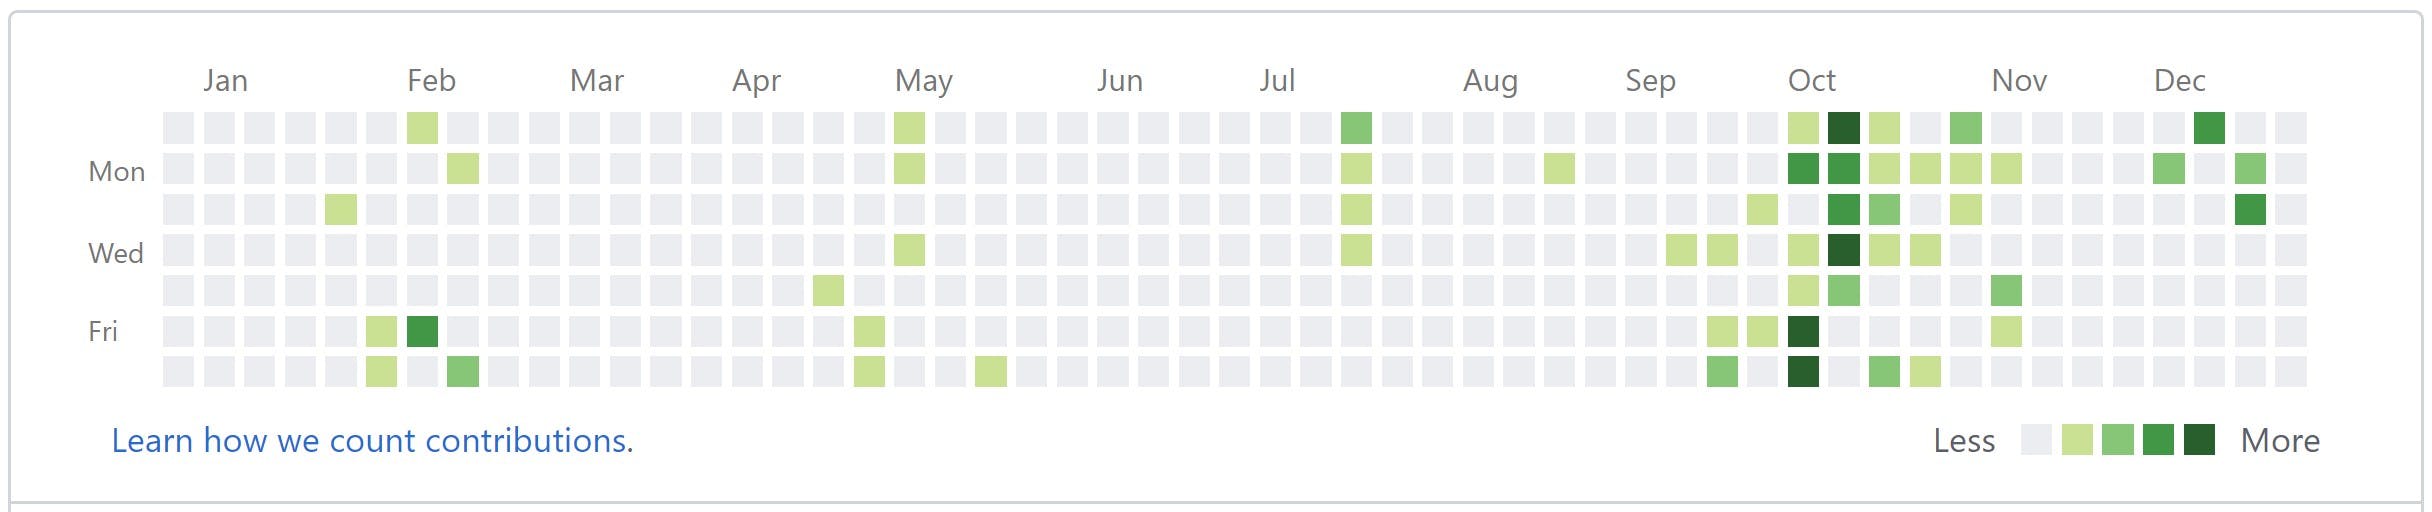 My GitHub contributions view in 2016, showing high activity in late September, October, and early November, reflecting my DevProgress contributions